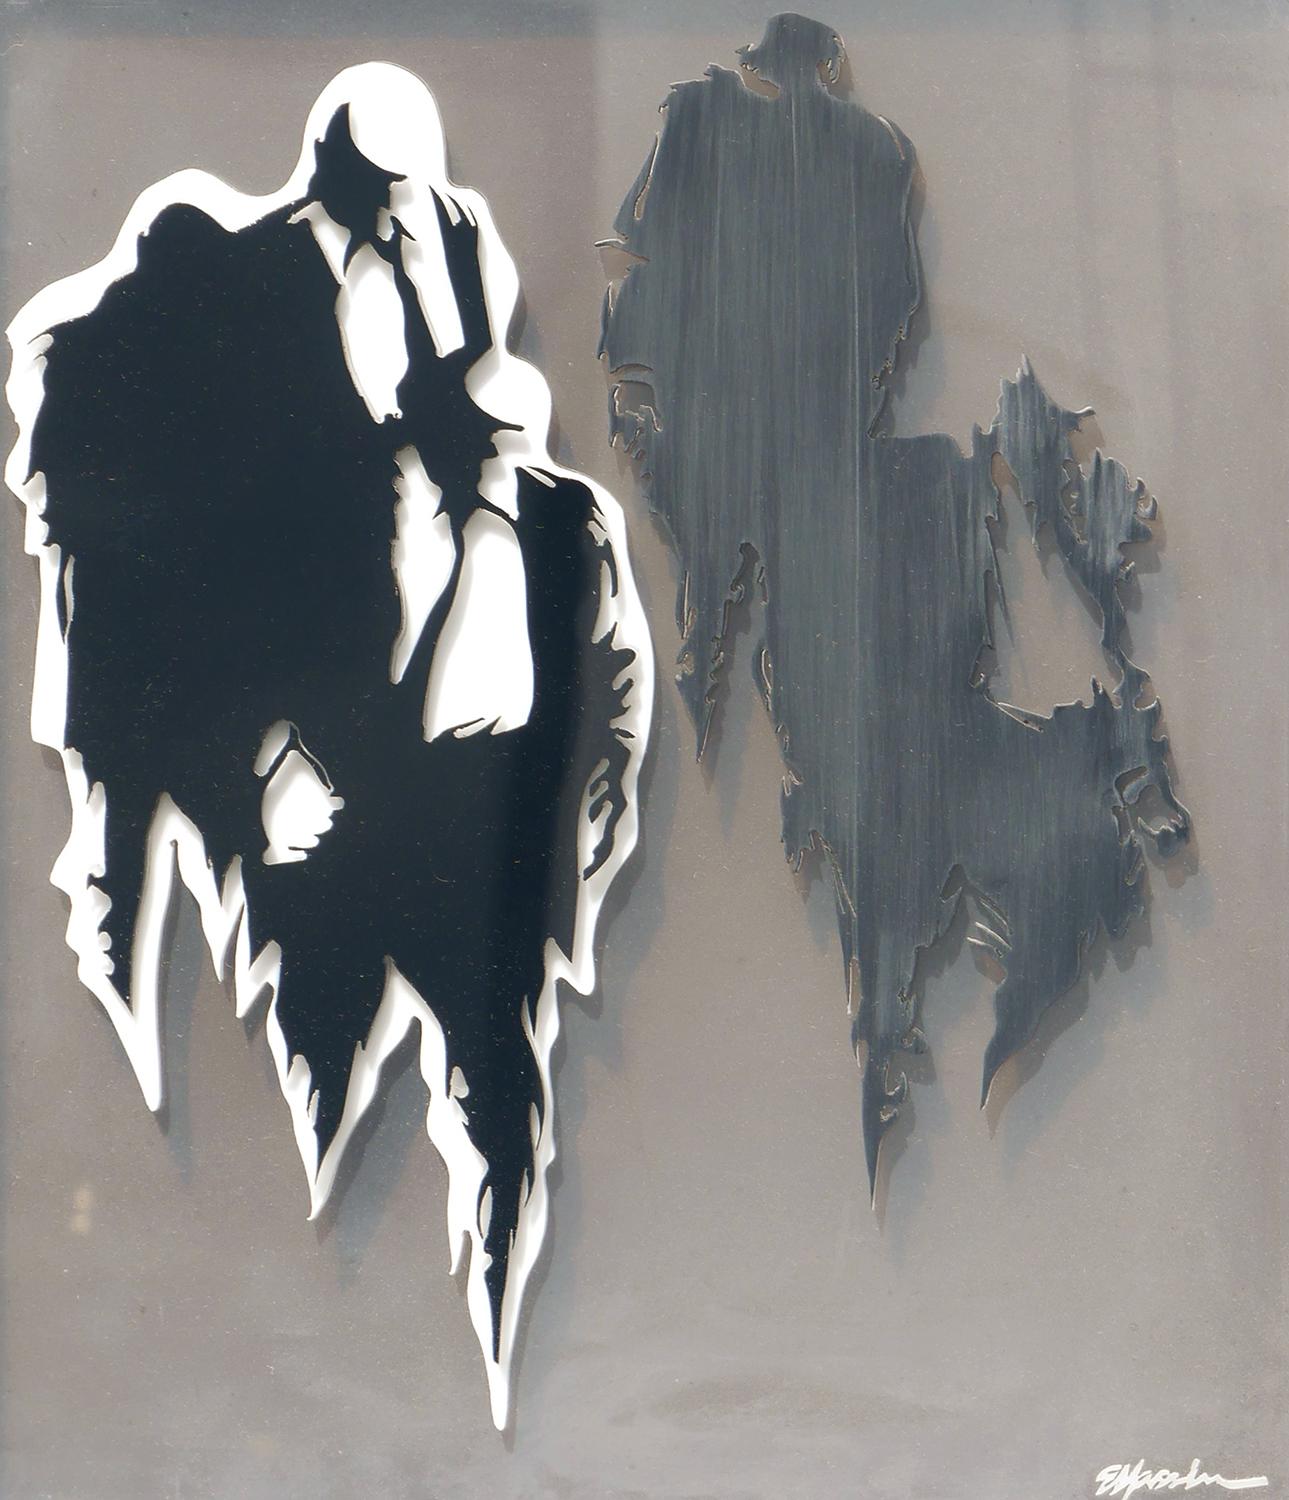 Modern Abstract Layered Acrylic Wall Sculpture of Walking Male Figures in Suits 2